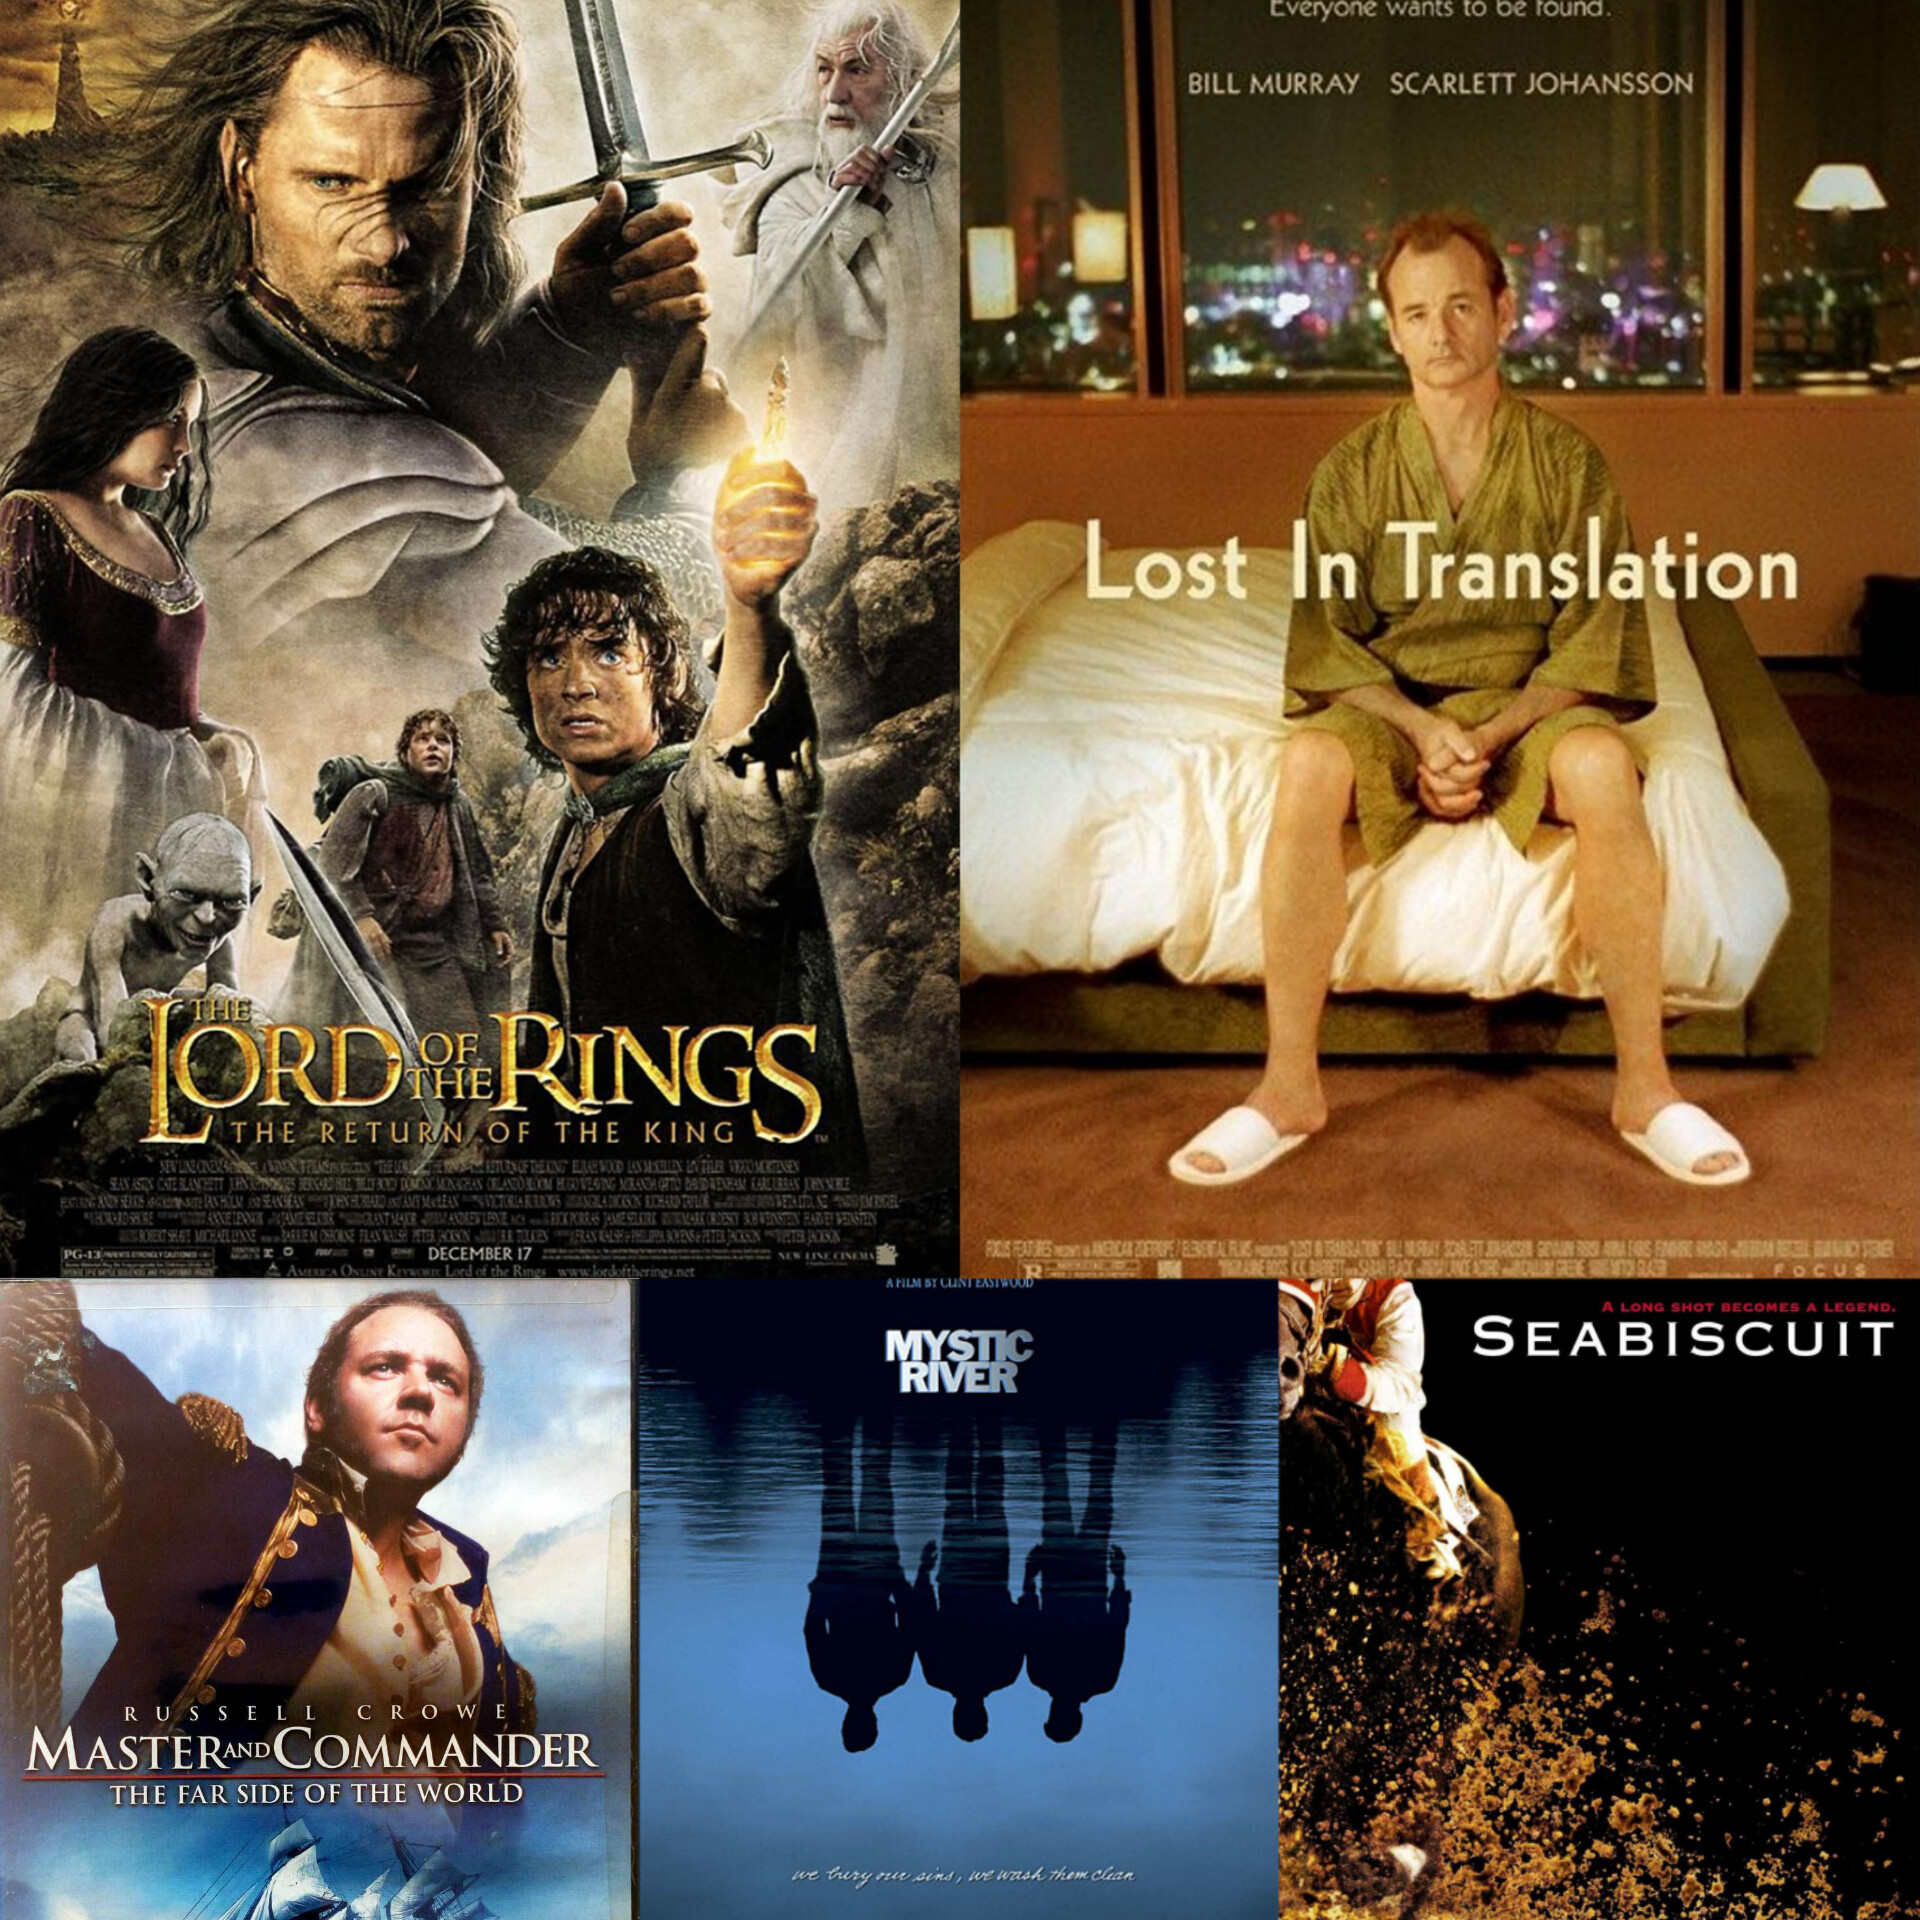 Awards for the Lord Of The Rings-Films